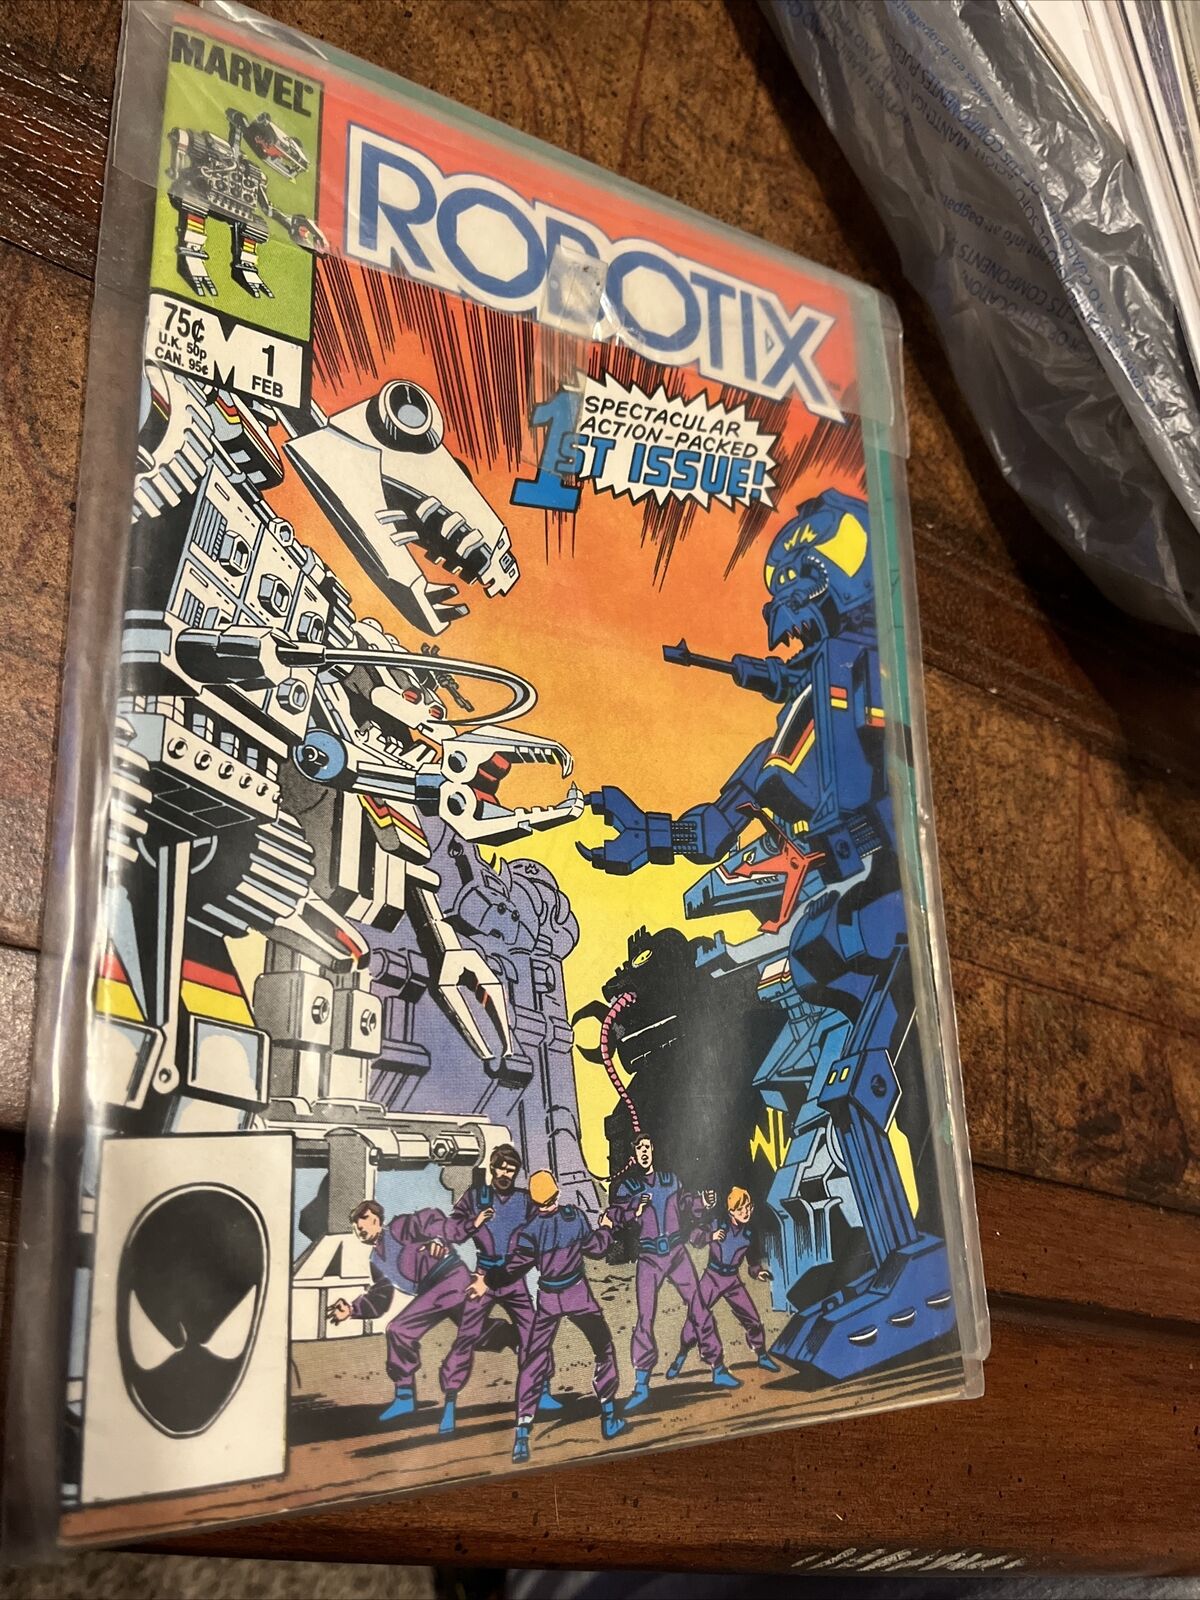 Robotix #1 Marvel Comic Book 1986 HIGH GRADE Spectacular Action-Packed 1st Issue